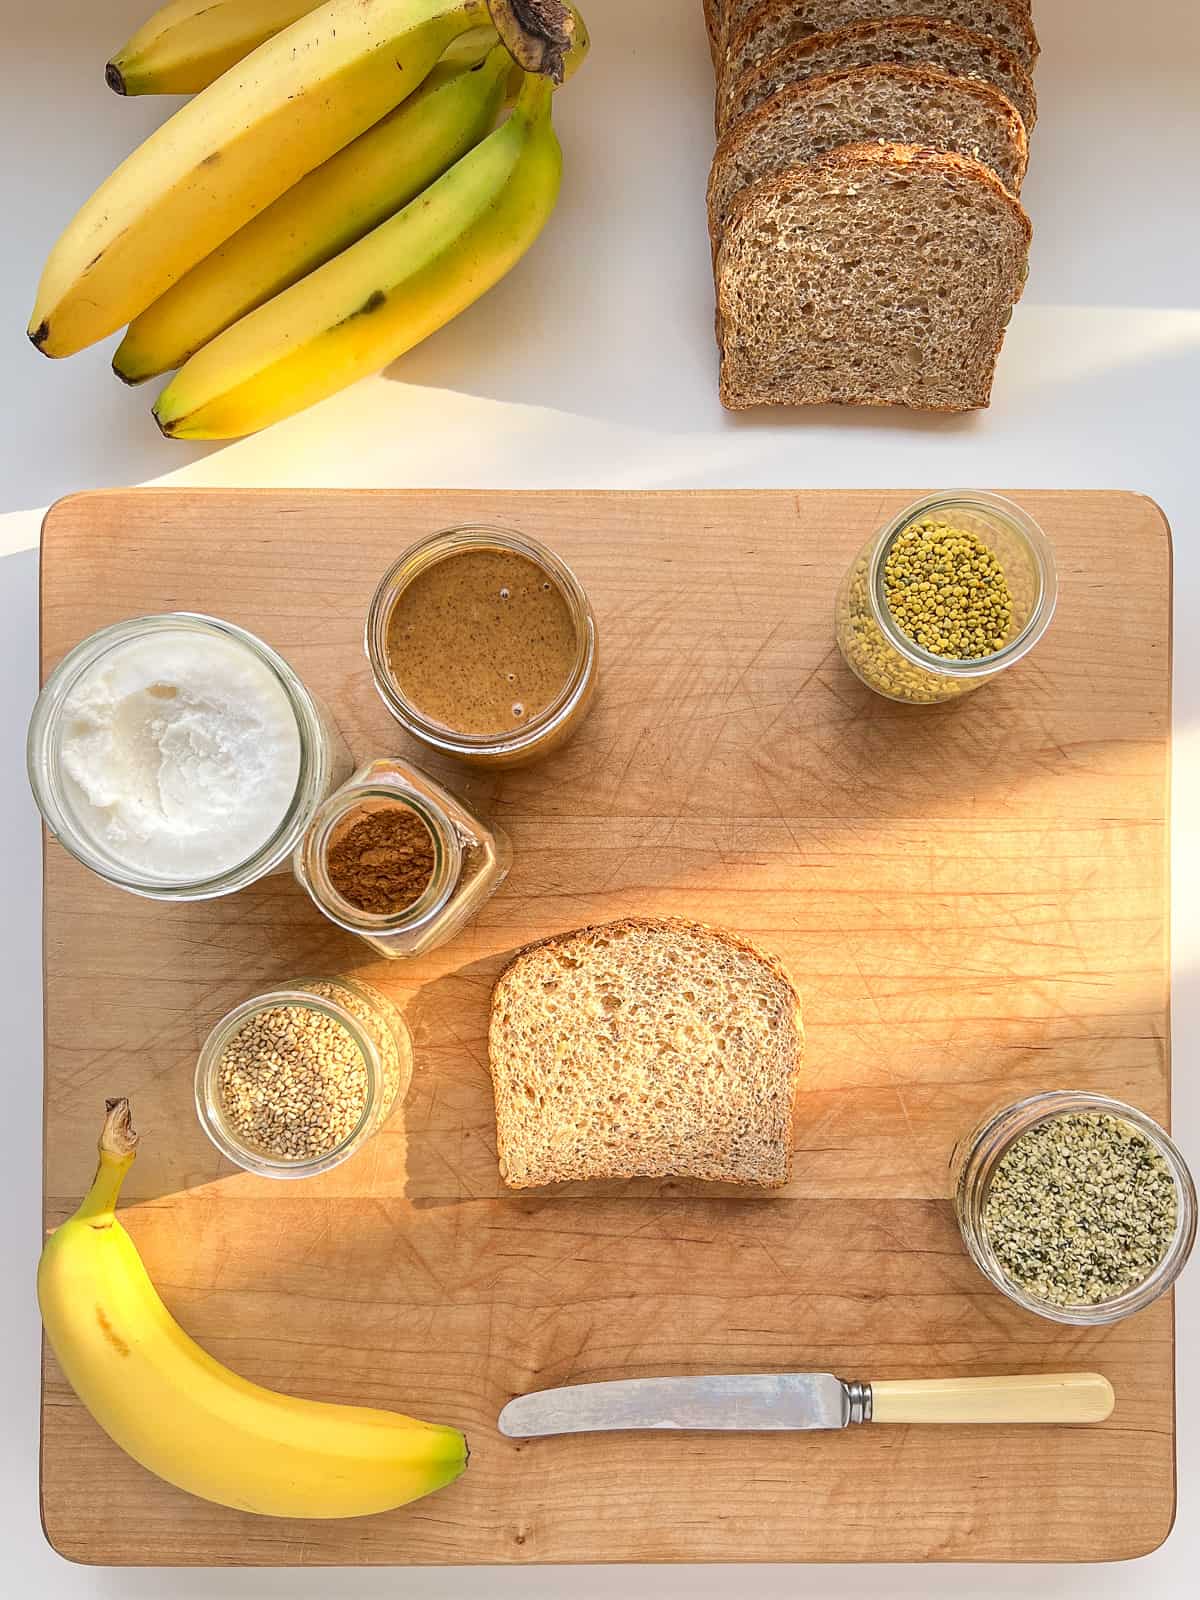 An image of the ingredients needed for banana supreme toast.